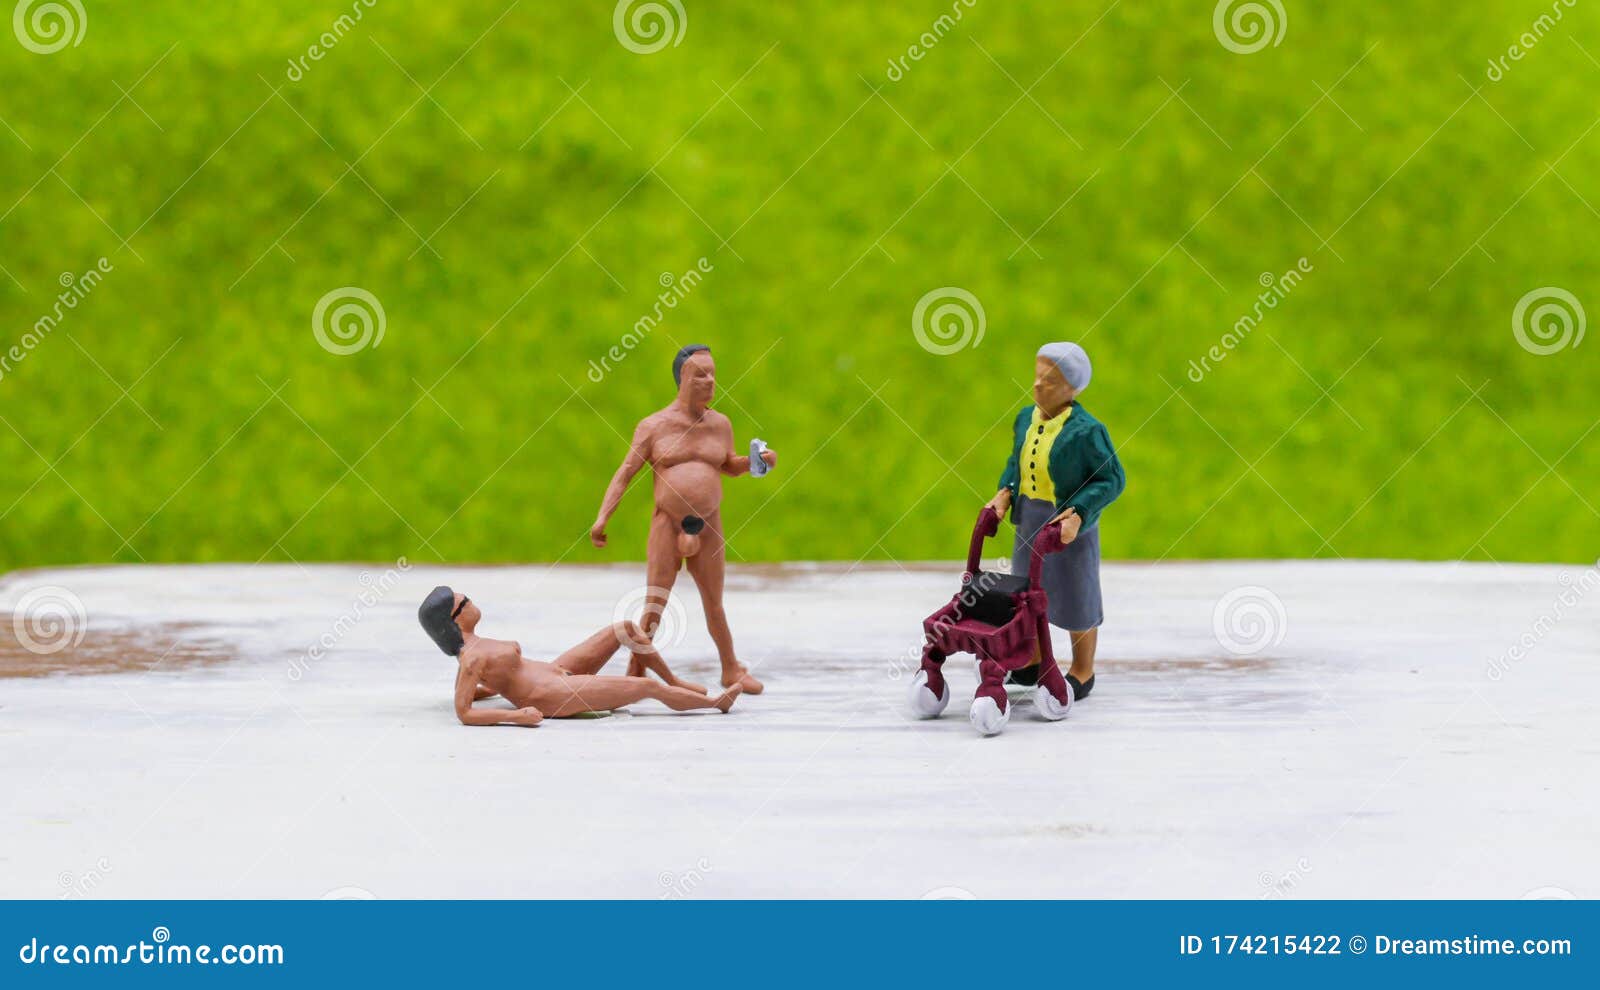 old lady with walker frame meets sunbathers